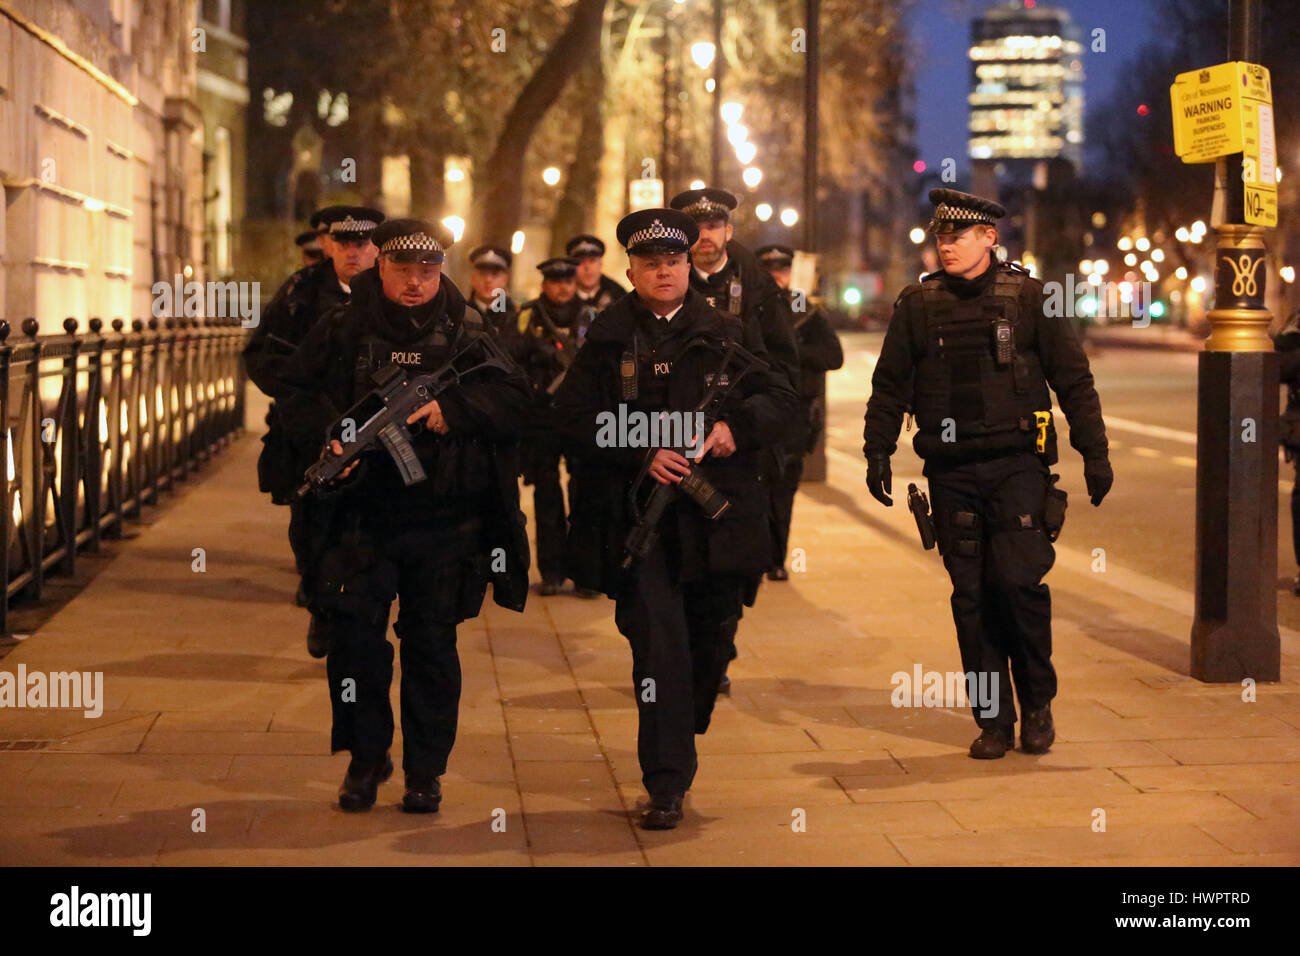 Heavily armed police have Whitehall in lockdown as night falls after the terror attack in Westminster today. Credit: Nigel Bowles/Alamy Live News Stock Photo